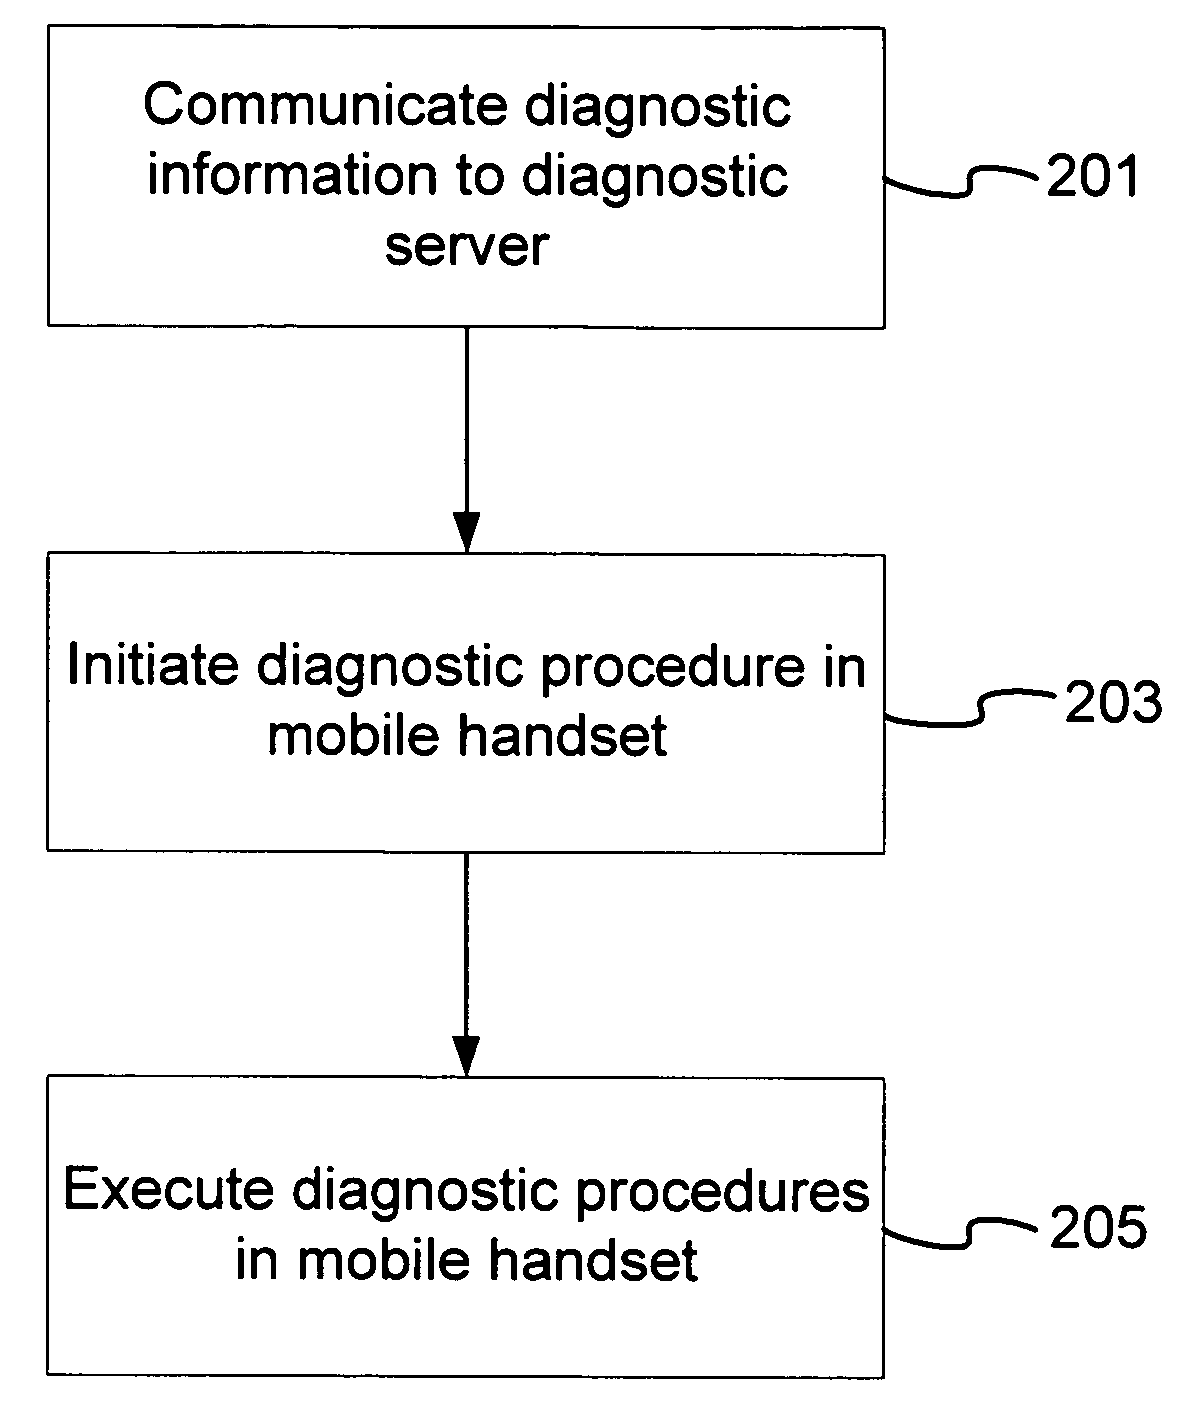 Carrier network capable of conducting remote diagnostics in a mobile handset